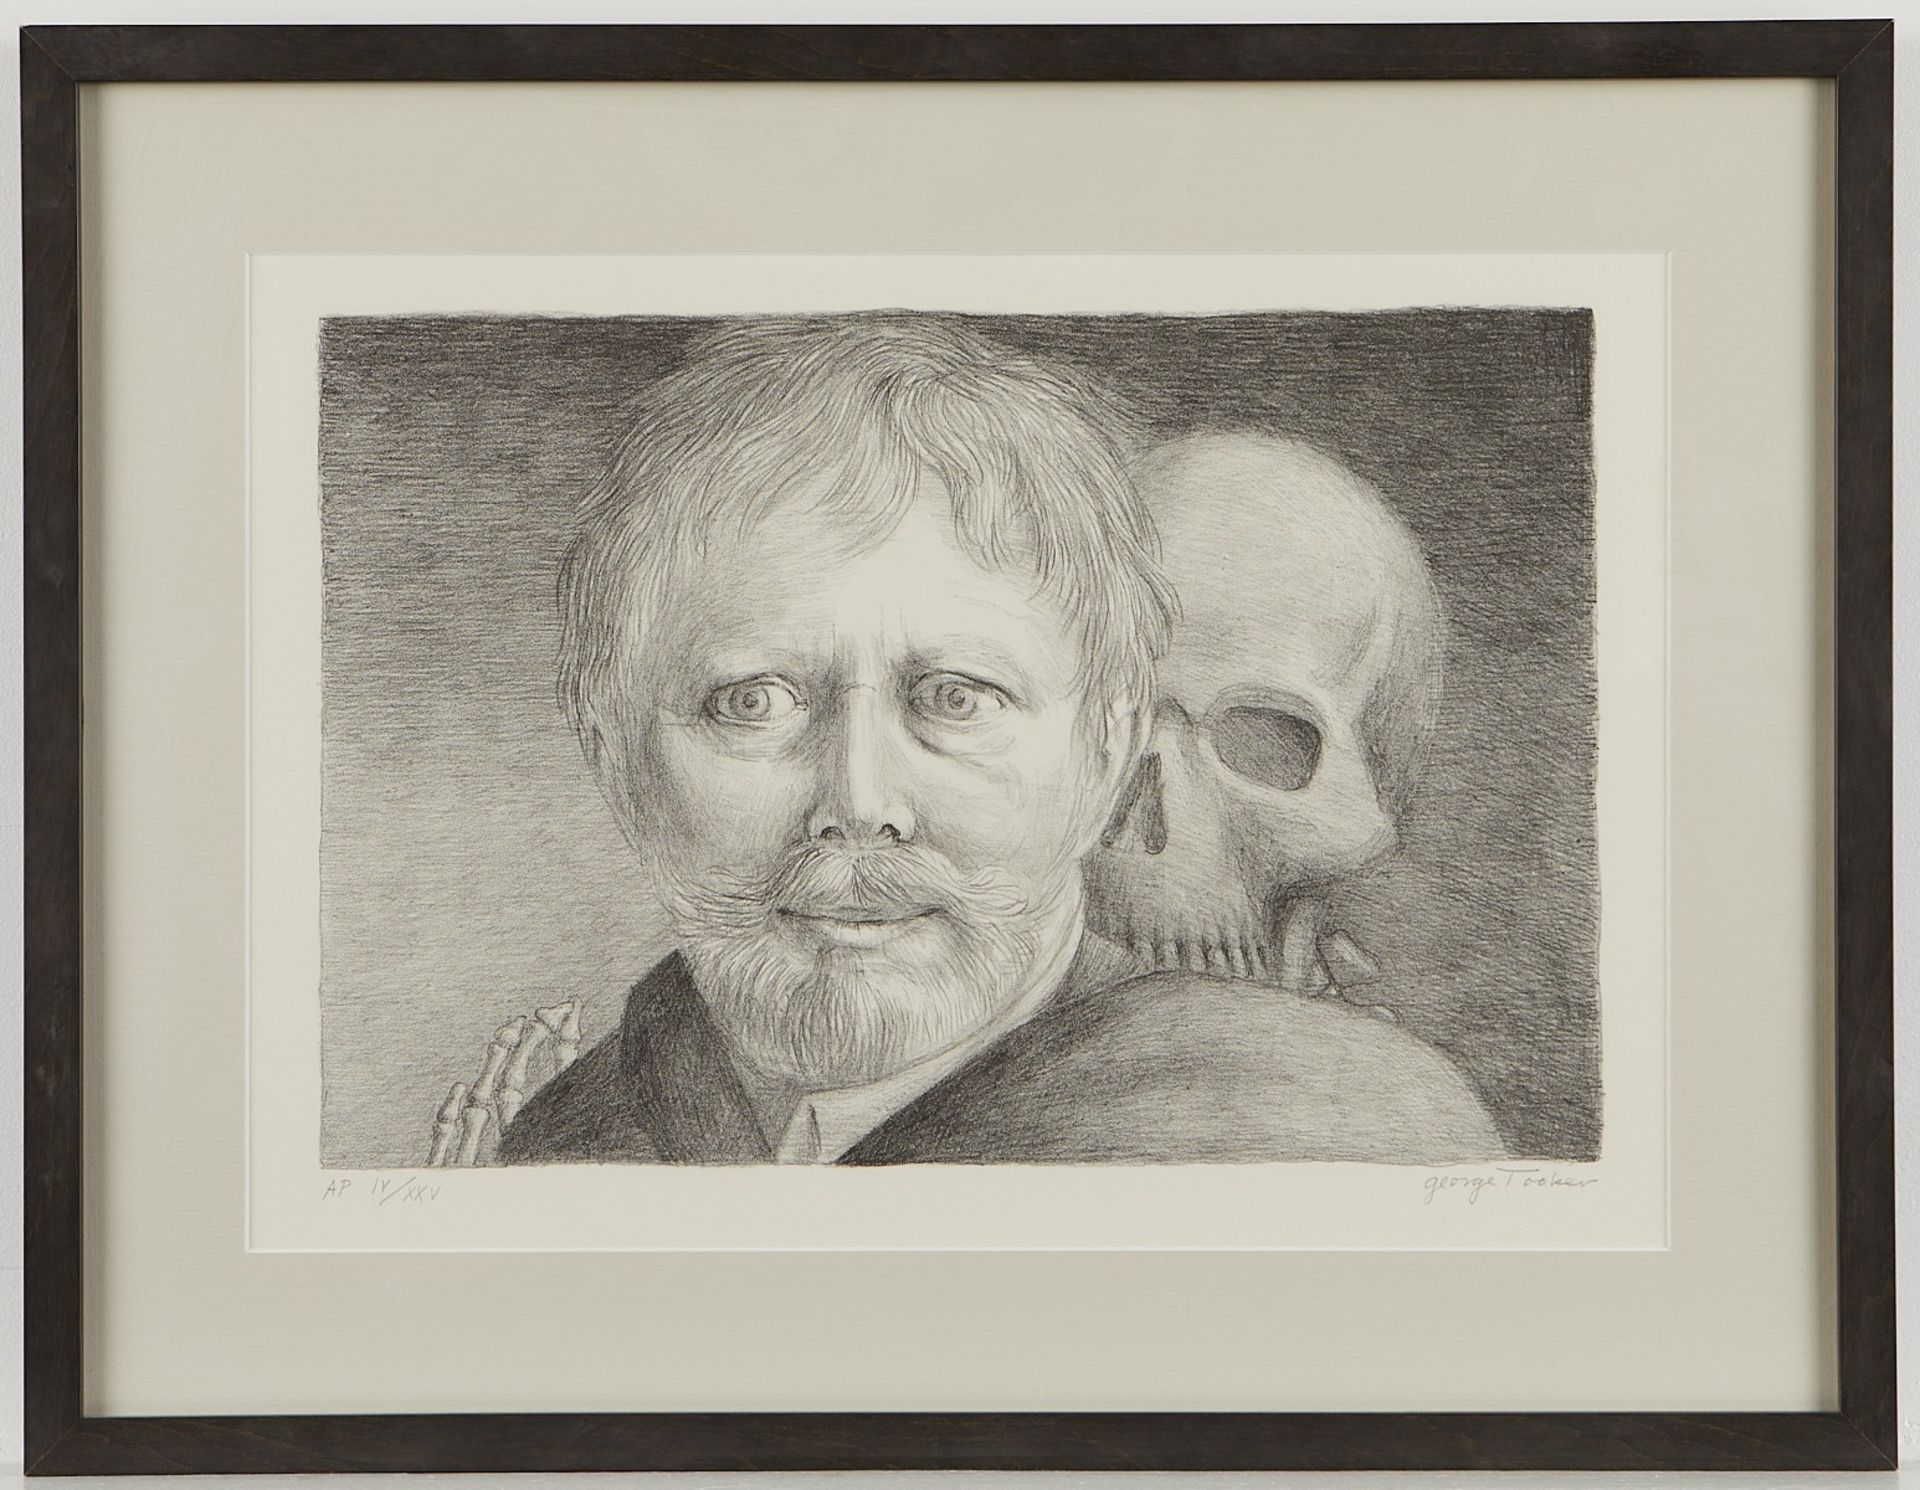 George Tooker "Self Portrait" Lithograph 1996 - Image 2 of 6